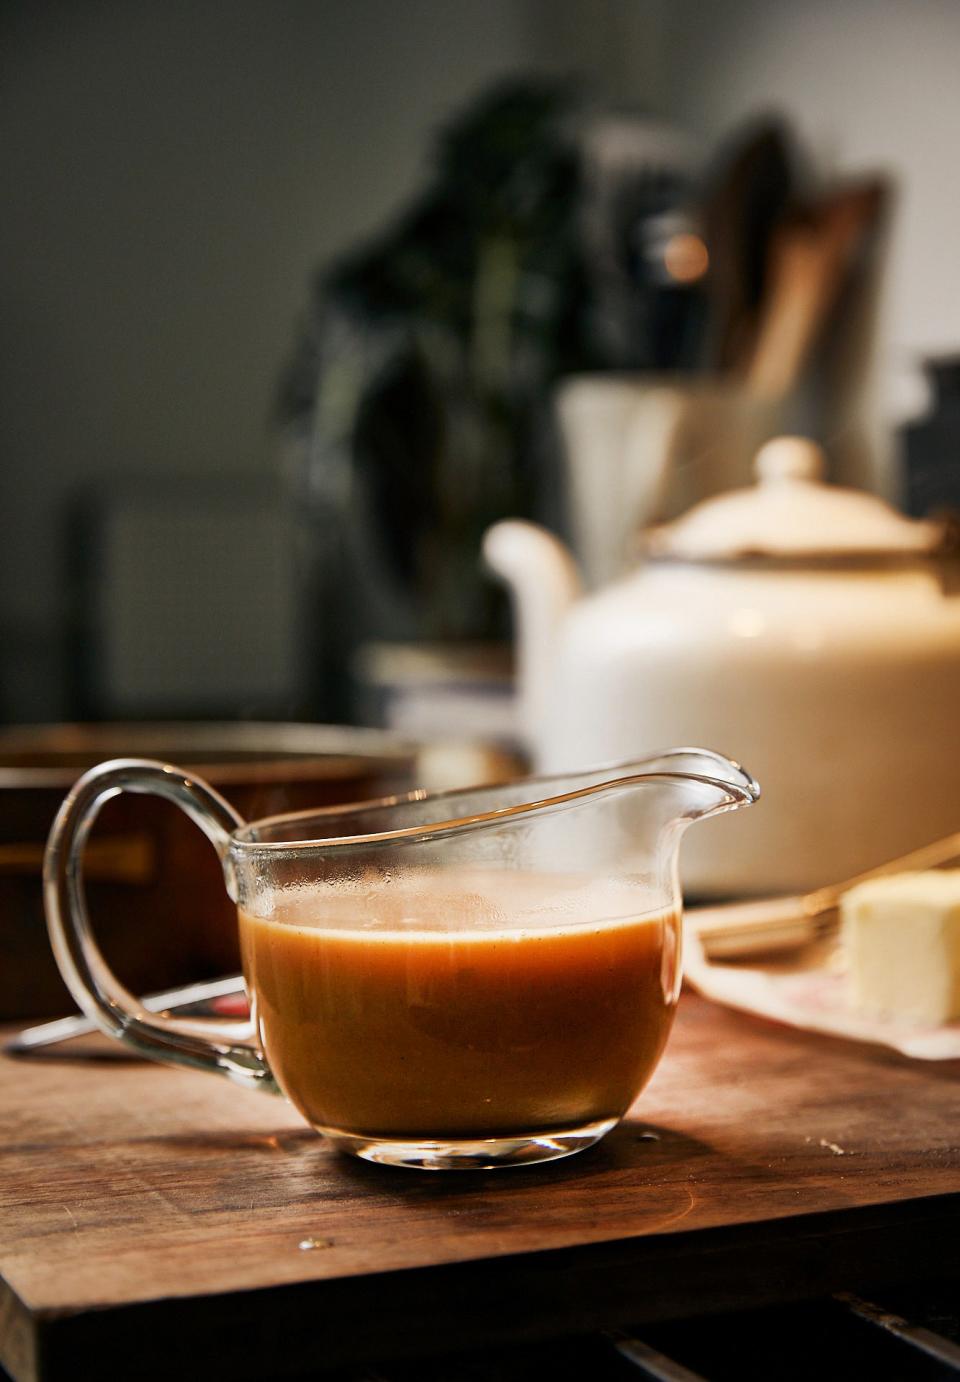 A+ gravy does not require homemade stock.